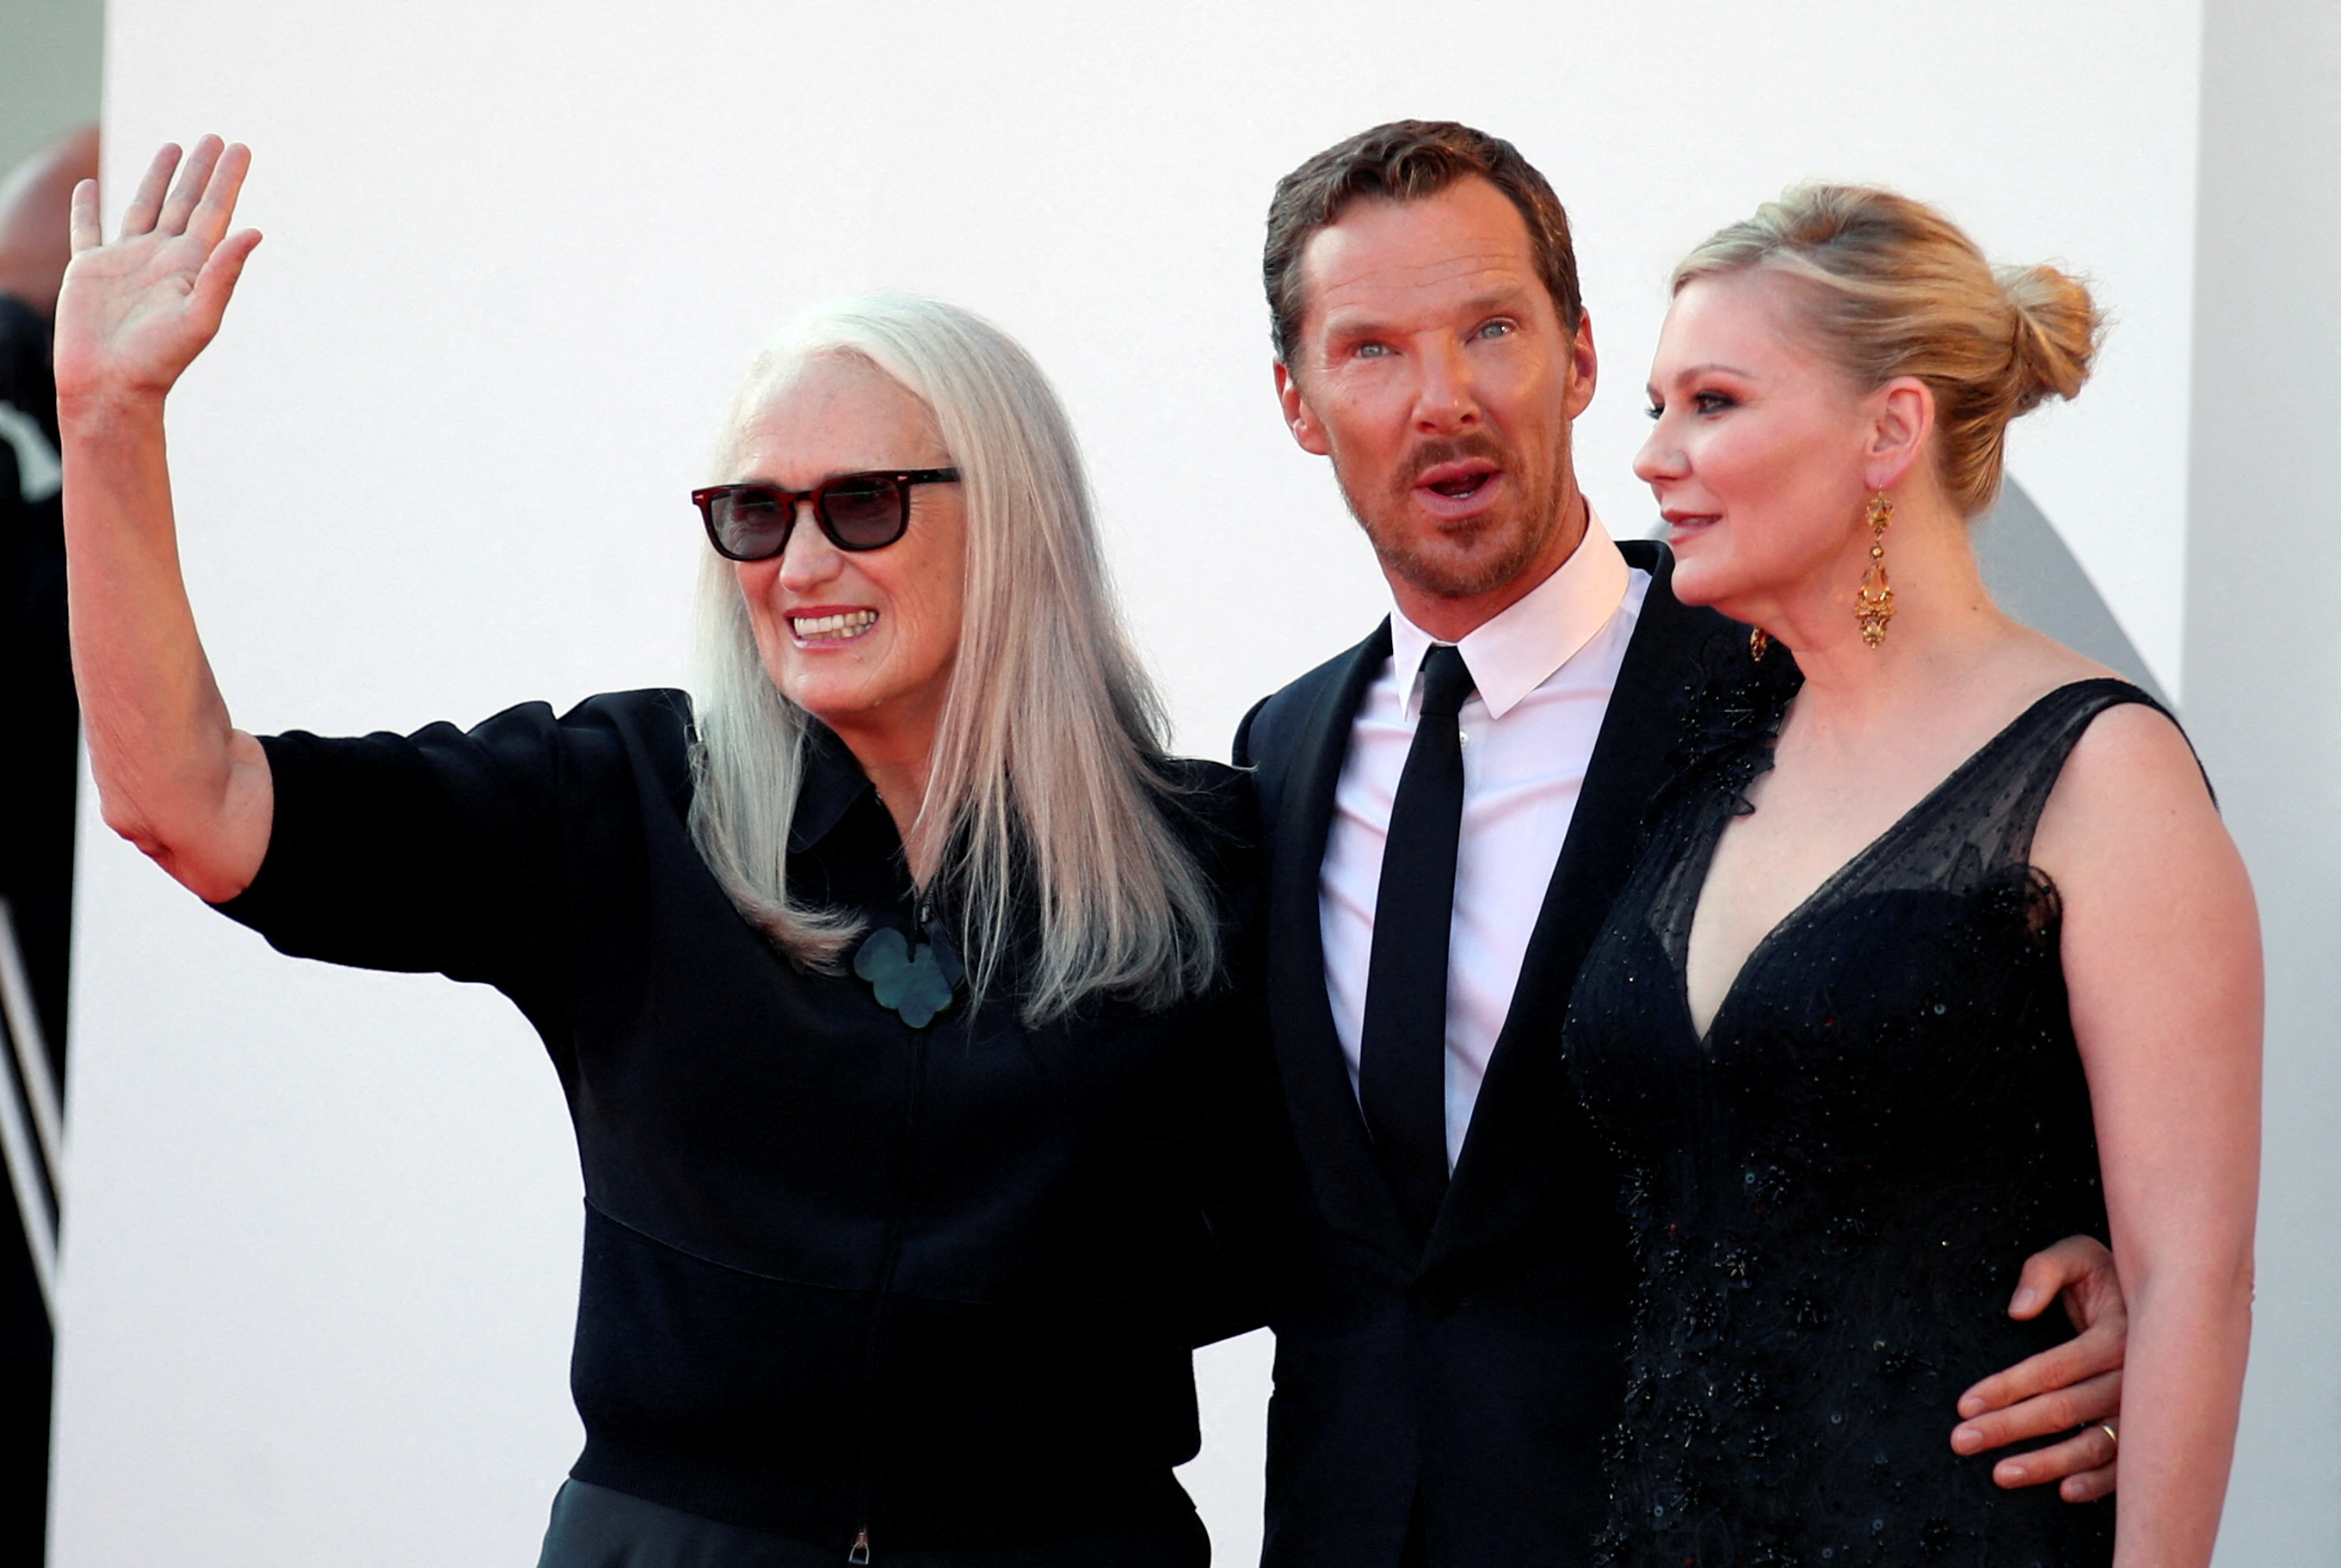 The 78th Venice Film Festival - Screening of the film 'The Power of the Dog' in competition - Red Carpet Arrivals - Venice, Italy September 2, 2021 - Director Jane Campion, actor Benedict Cumberbatch and actor Kirsten Dunst pose. REUTERS/Yara Nardi/File Photo